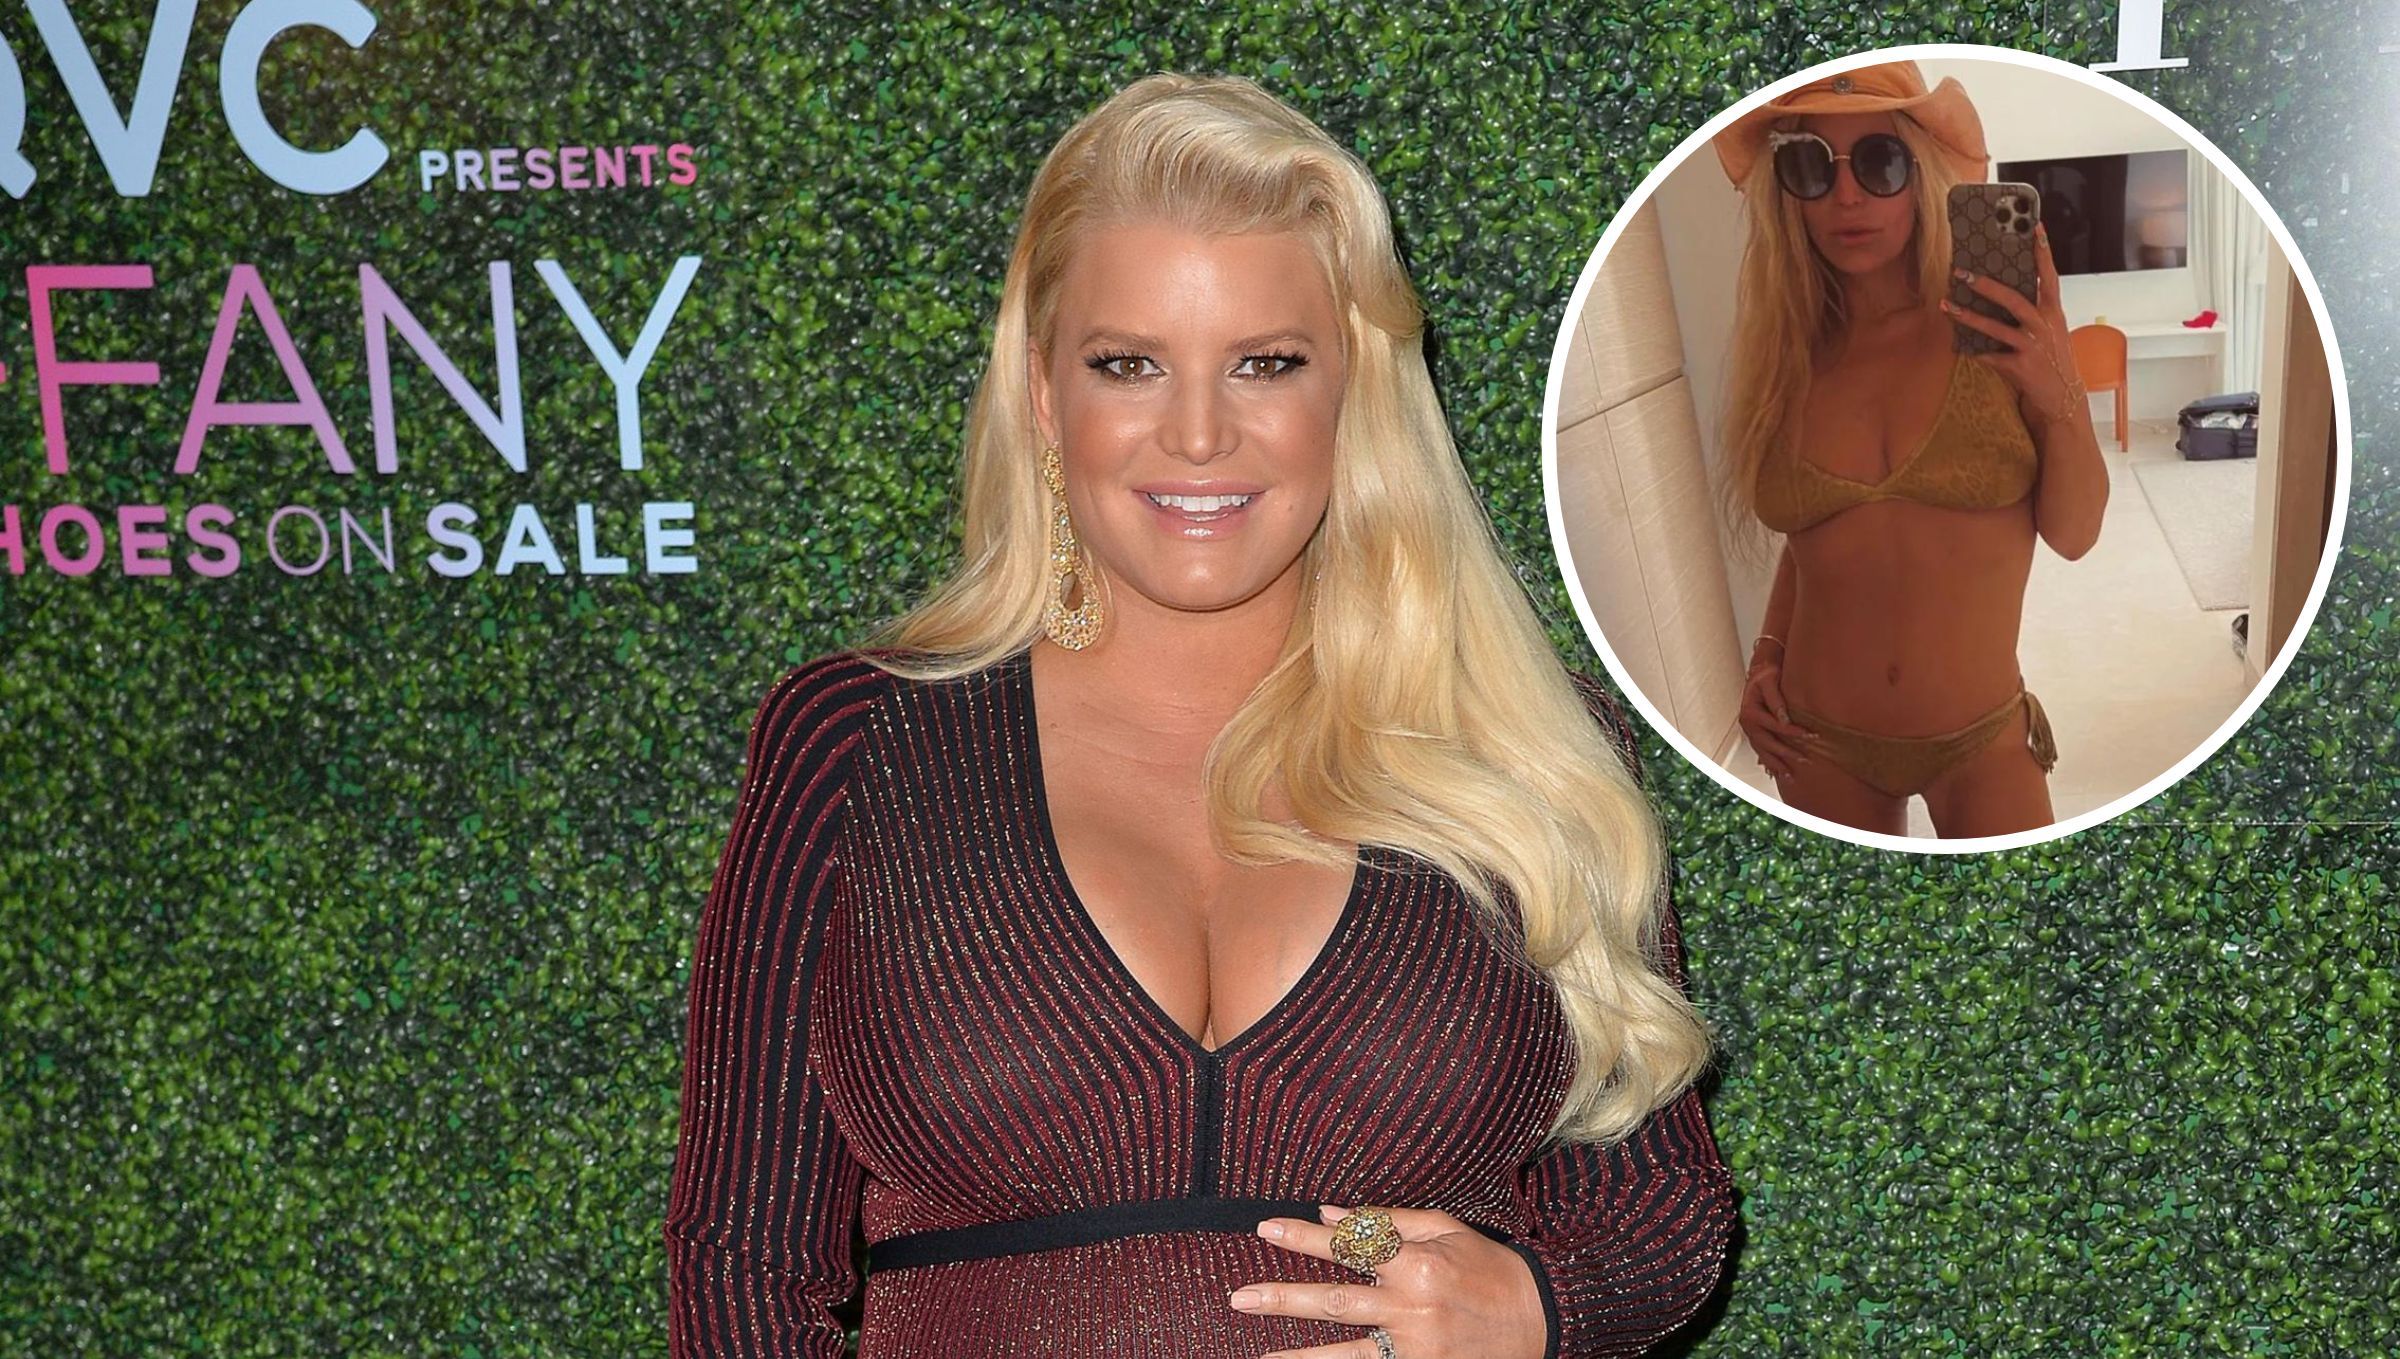 courtney haugh add jessica simpson ever been nude photo